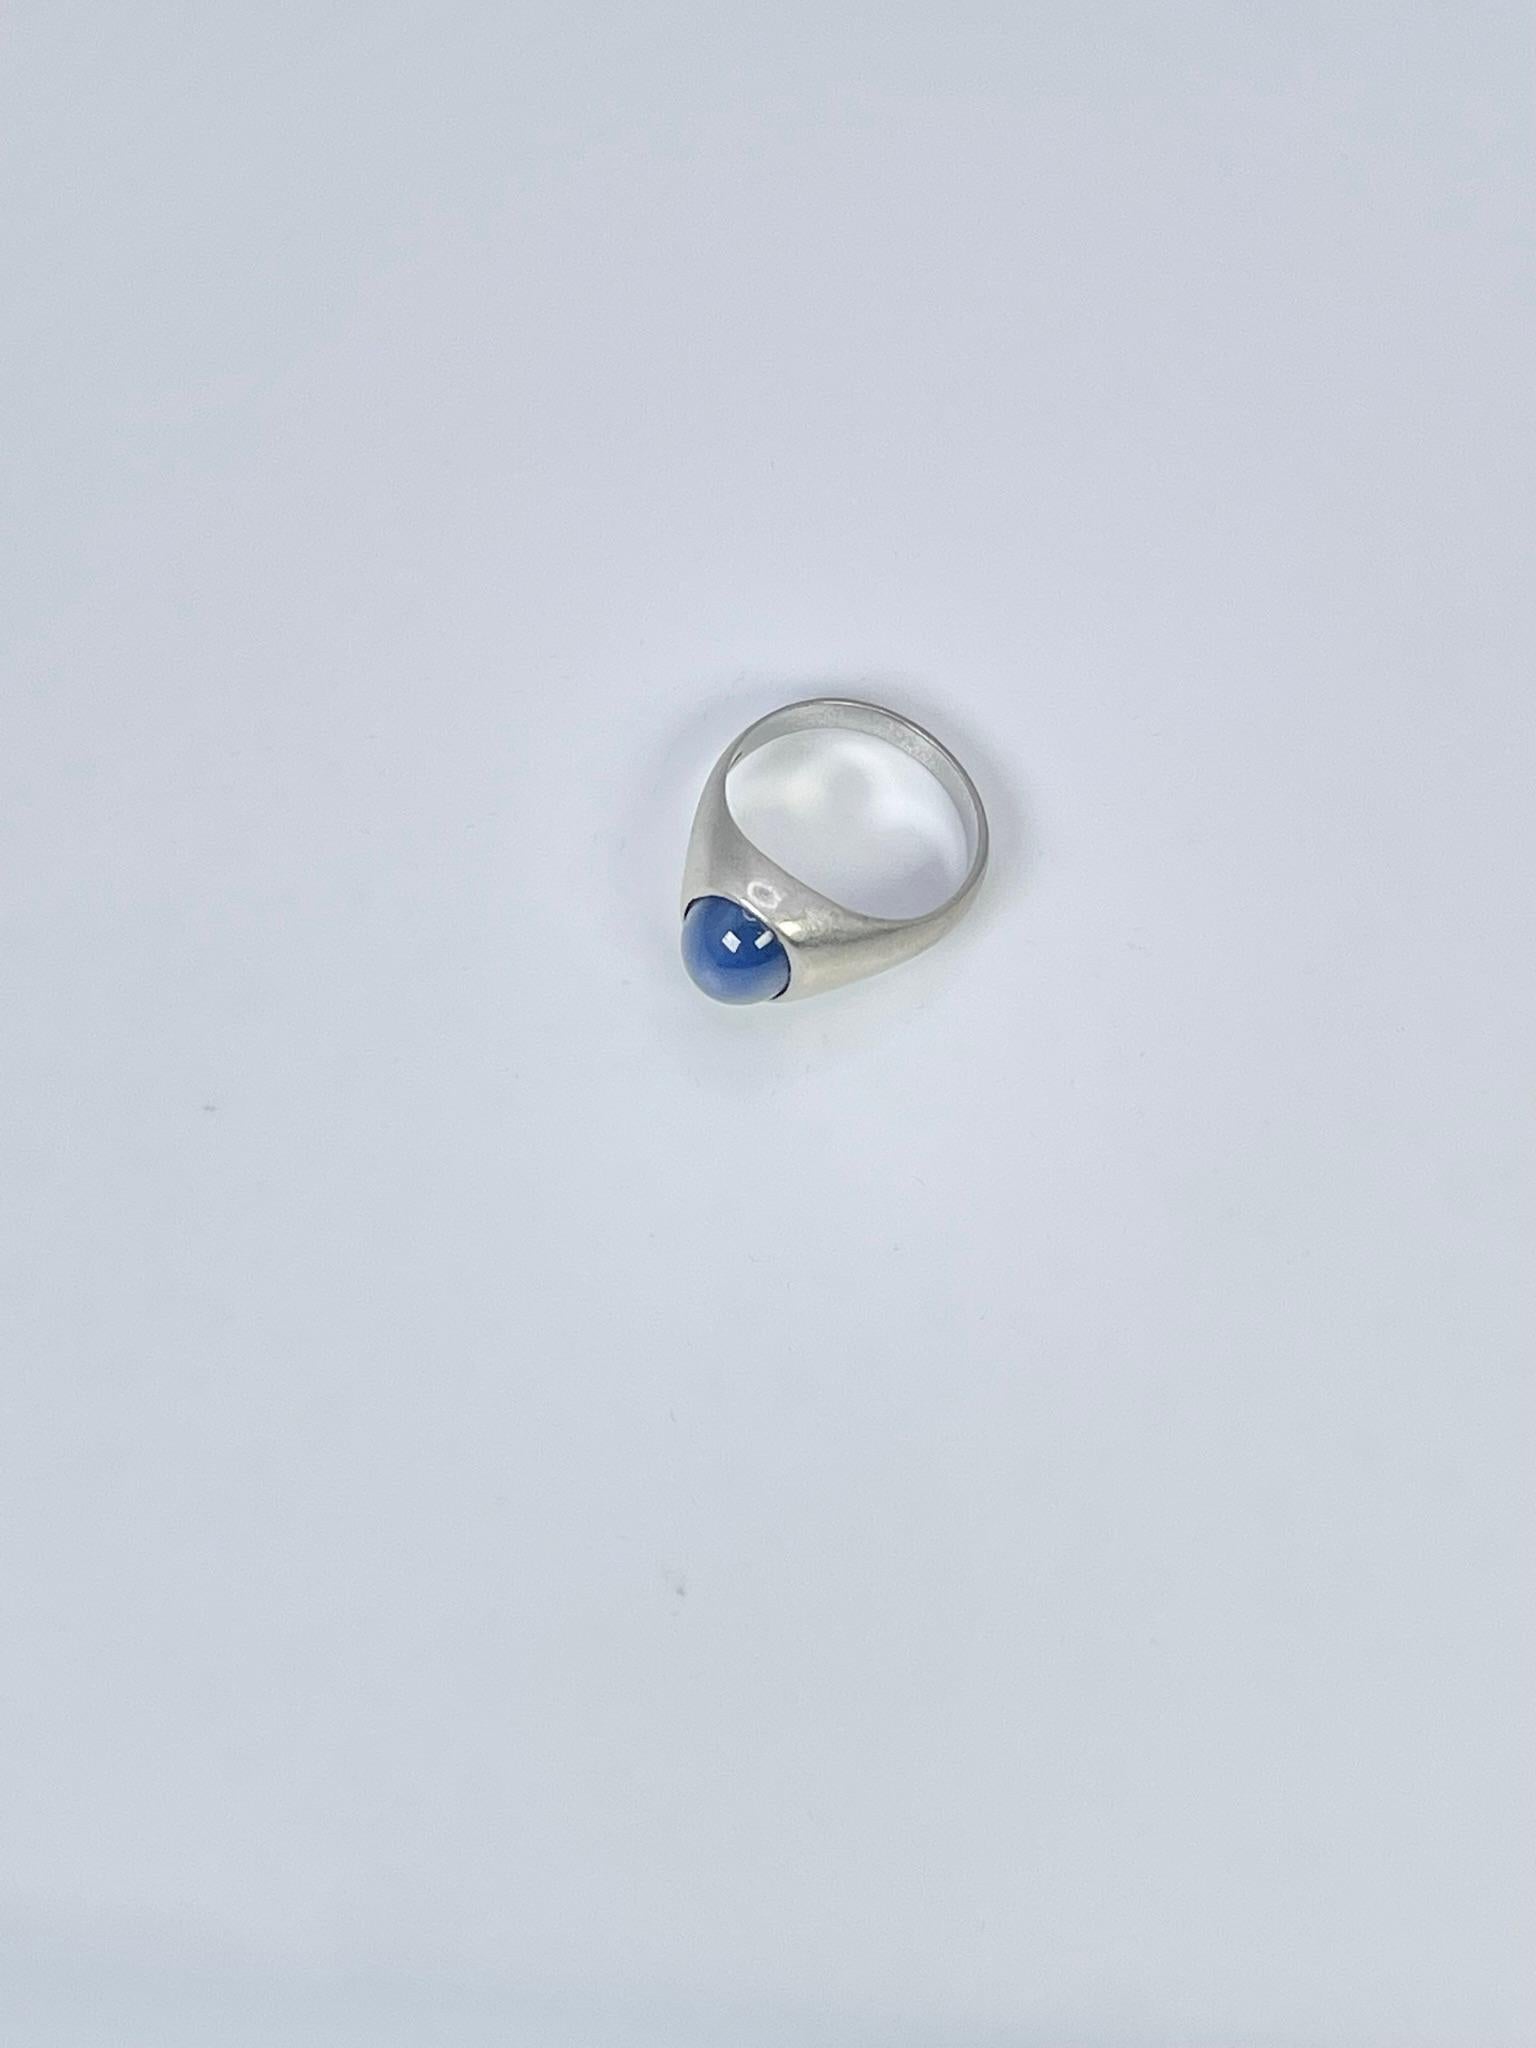 Unisex ring made with 4ct blue oval star sapphire in 14KT white gold.

GRAM WEIGHT: 5.06gr
GOLD: 14KT white gold
NATURAL SAPPHIRE
Cut: Oval
Color: Blue
Clarity: Moderately Included
Carat:4.02ct
SIZE: 5.5 (can be re-sized)
Item#: 205-00001